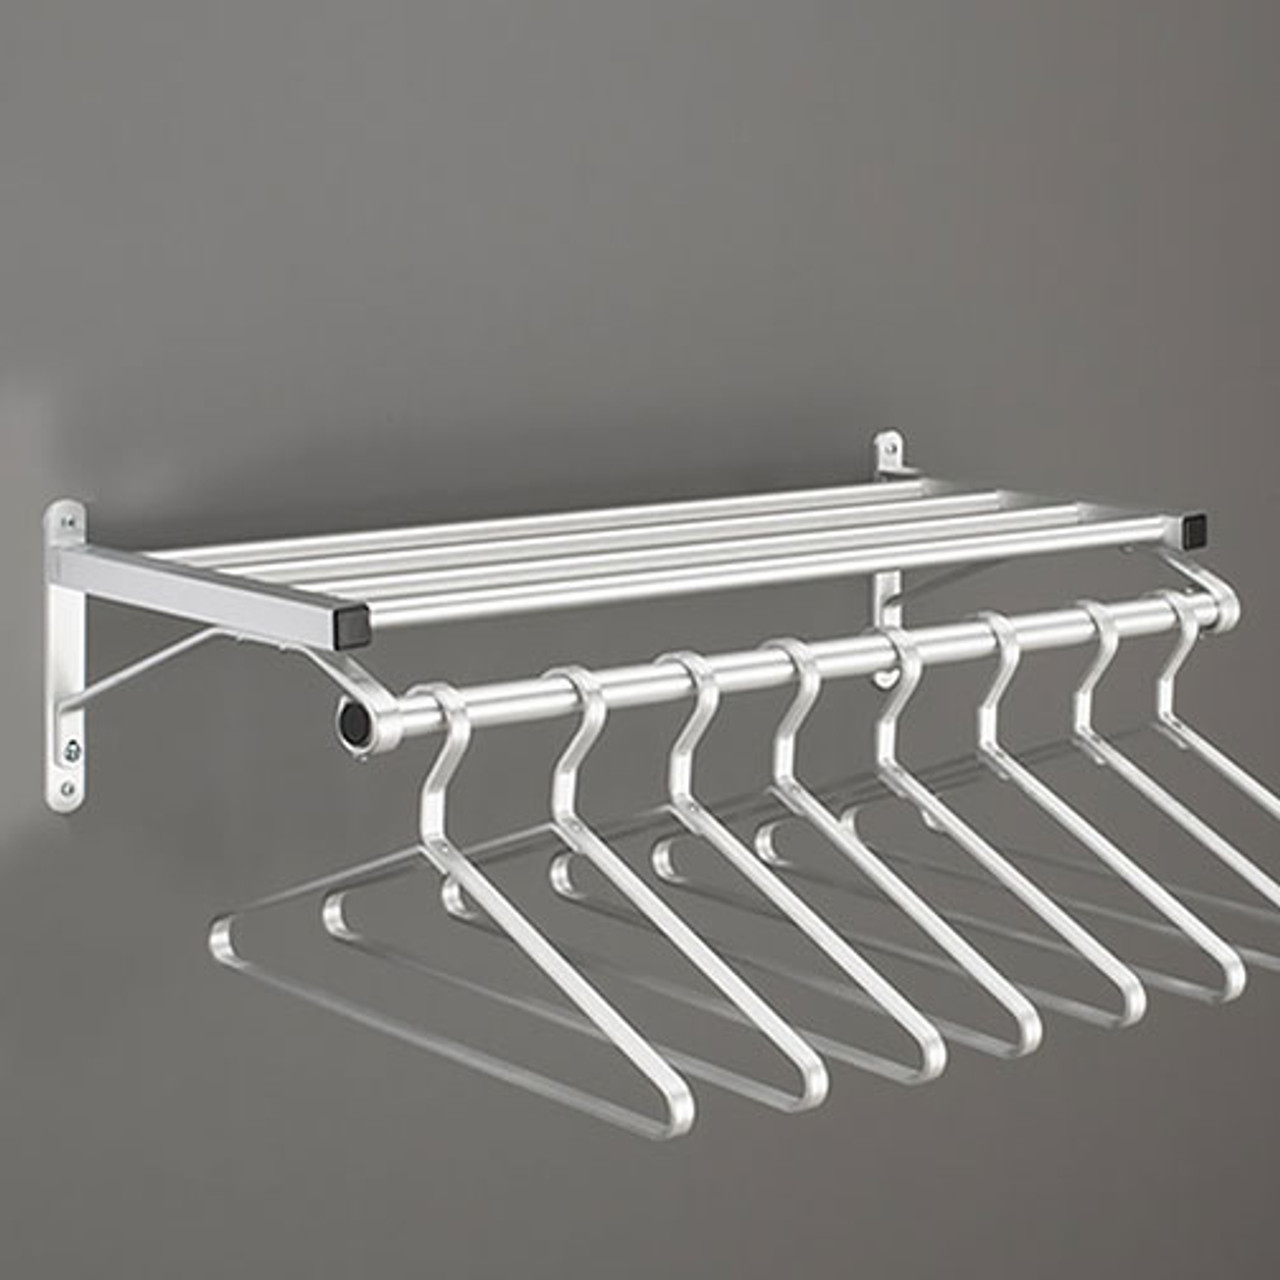 201 Series Modular Wall Coat Rack with Hanger Rod - Image Illustrates Design, Not to Scale - Hangers Sold Separately